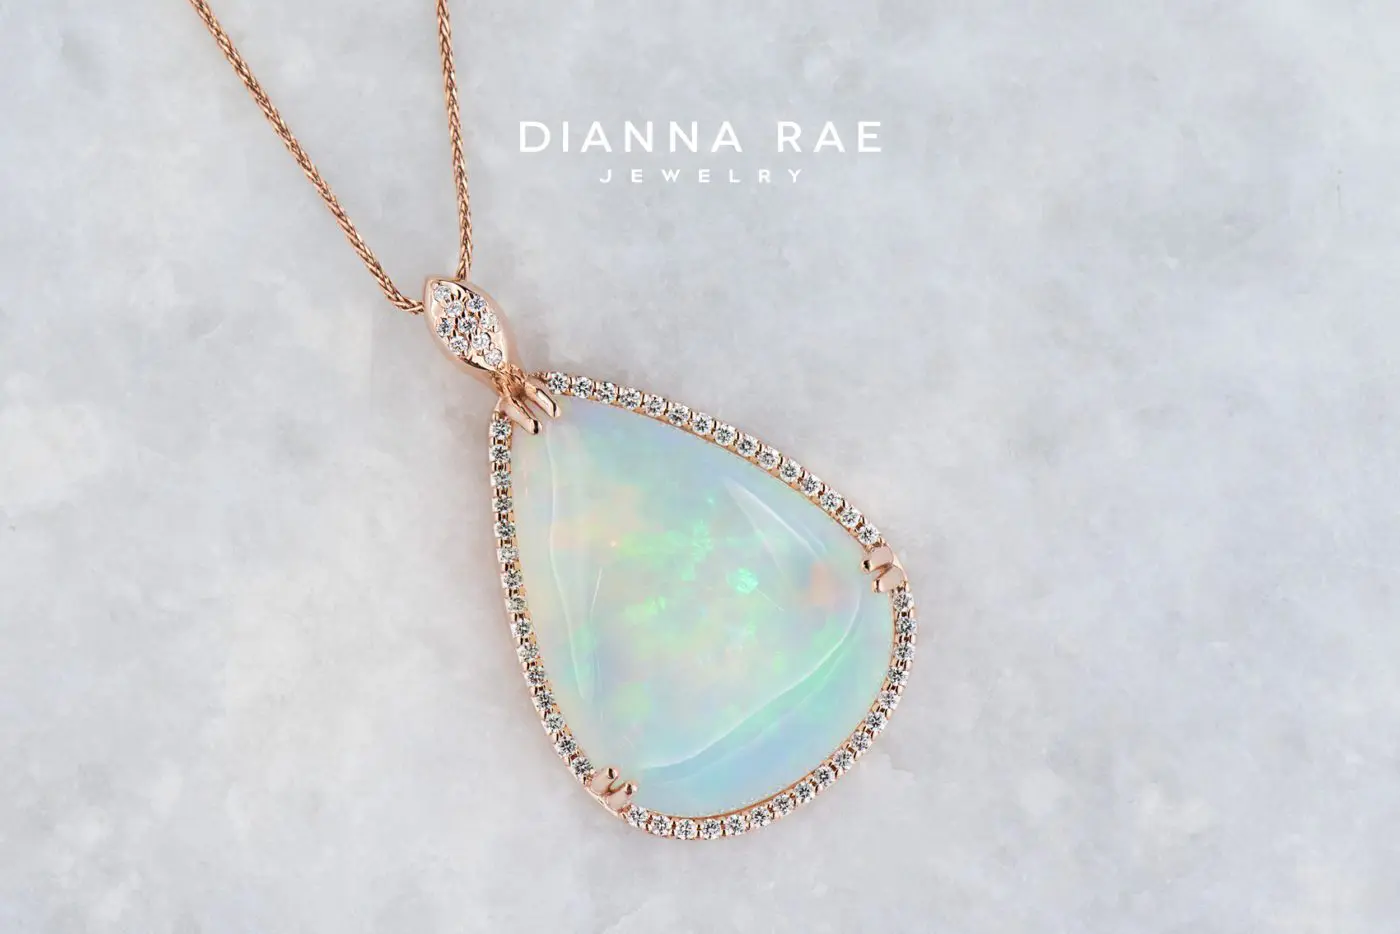 001-10641-001_DRJ_Rose-Gold-Pear-Shaped-Ethiopian-Opal-Pendant-with-Diamond-Halo-and-Bail_01